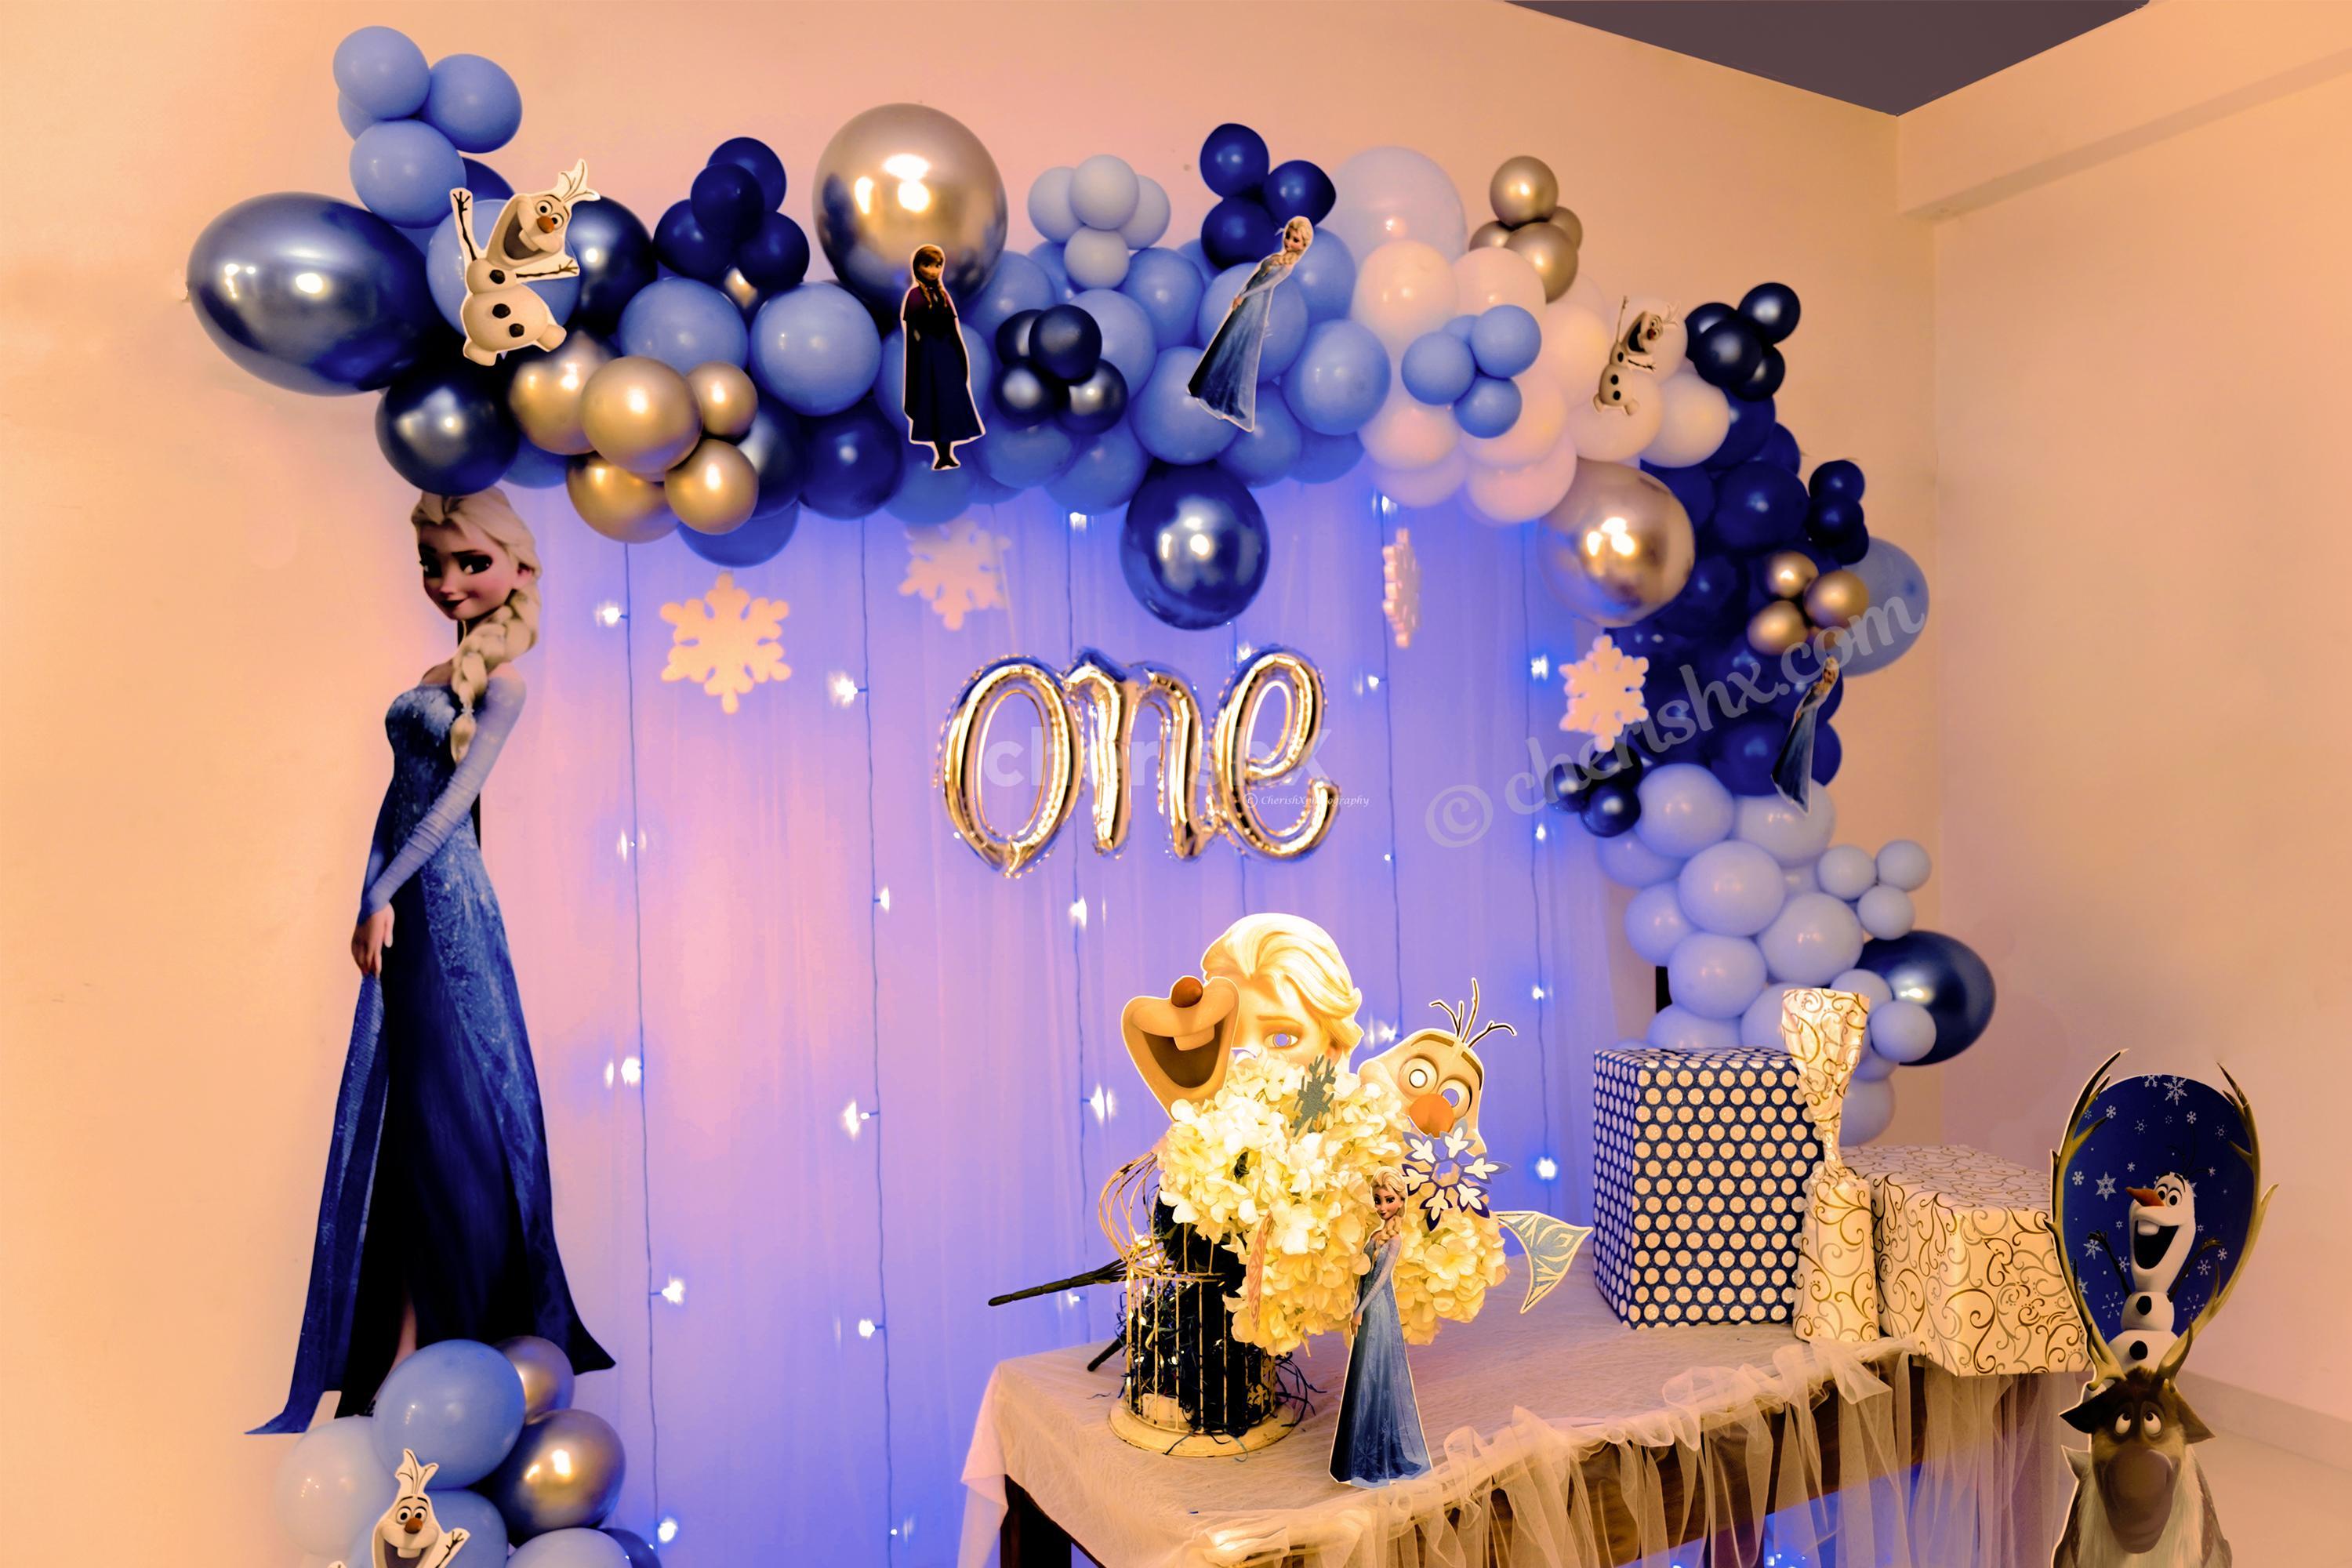 Disney's Frozen Themed Decoration includes character cut-outs and metallic and chrome balloons.